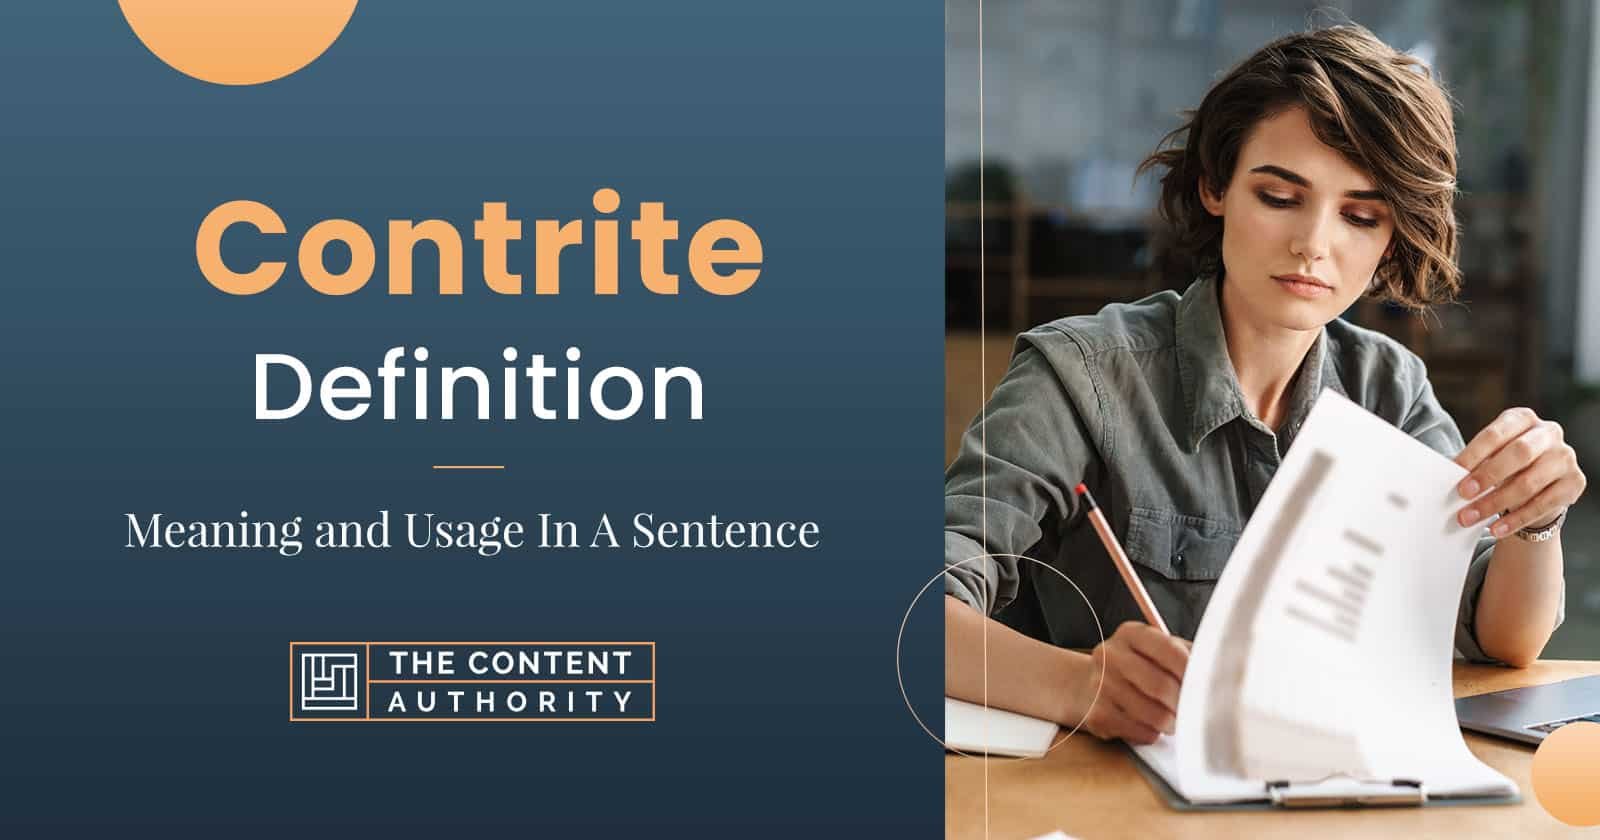 Contrite Definition – Meaning and Usage In A Sentence